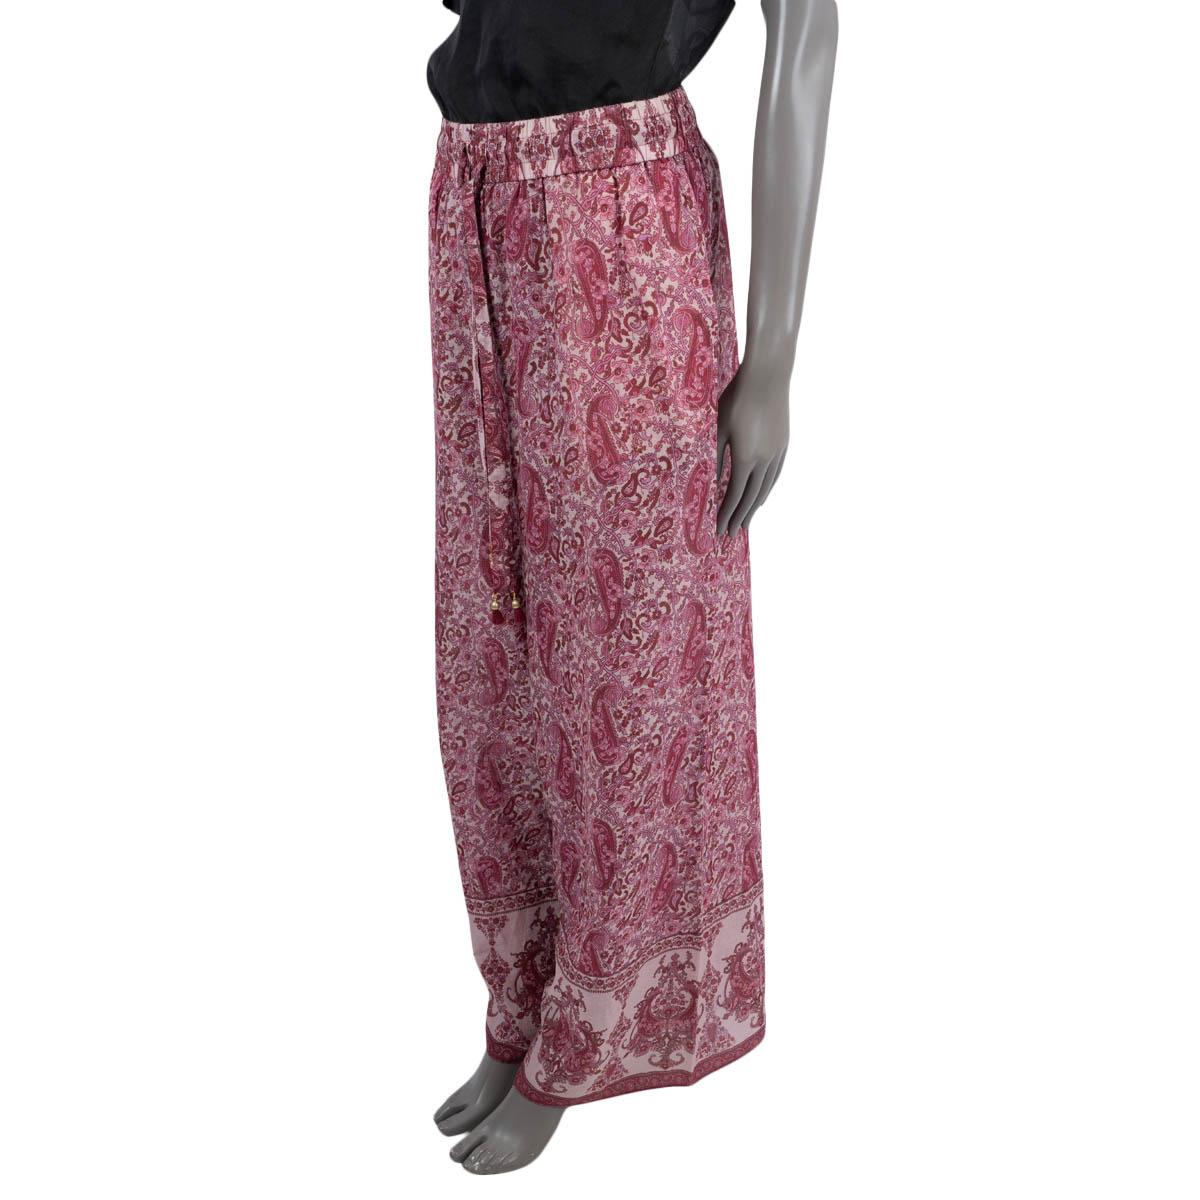 100% authentic Zimmermann Amari wide-leg pants in magenta pink cotton voile (100%). Features a paisley print, elastic waistband with drawstring and side seam pockets. Unlined. Have been worn and are in excellent condition.

Measurements
Tag